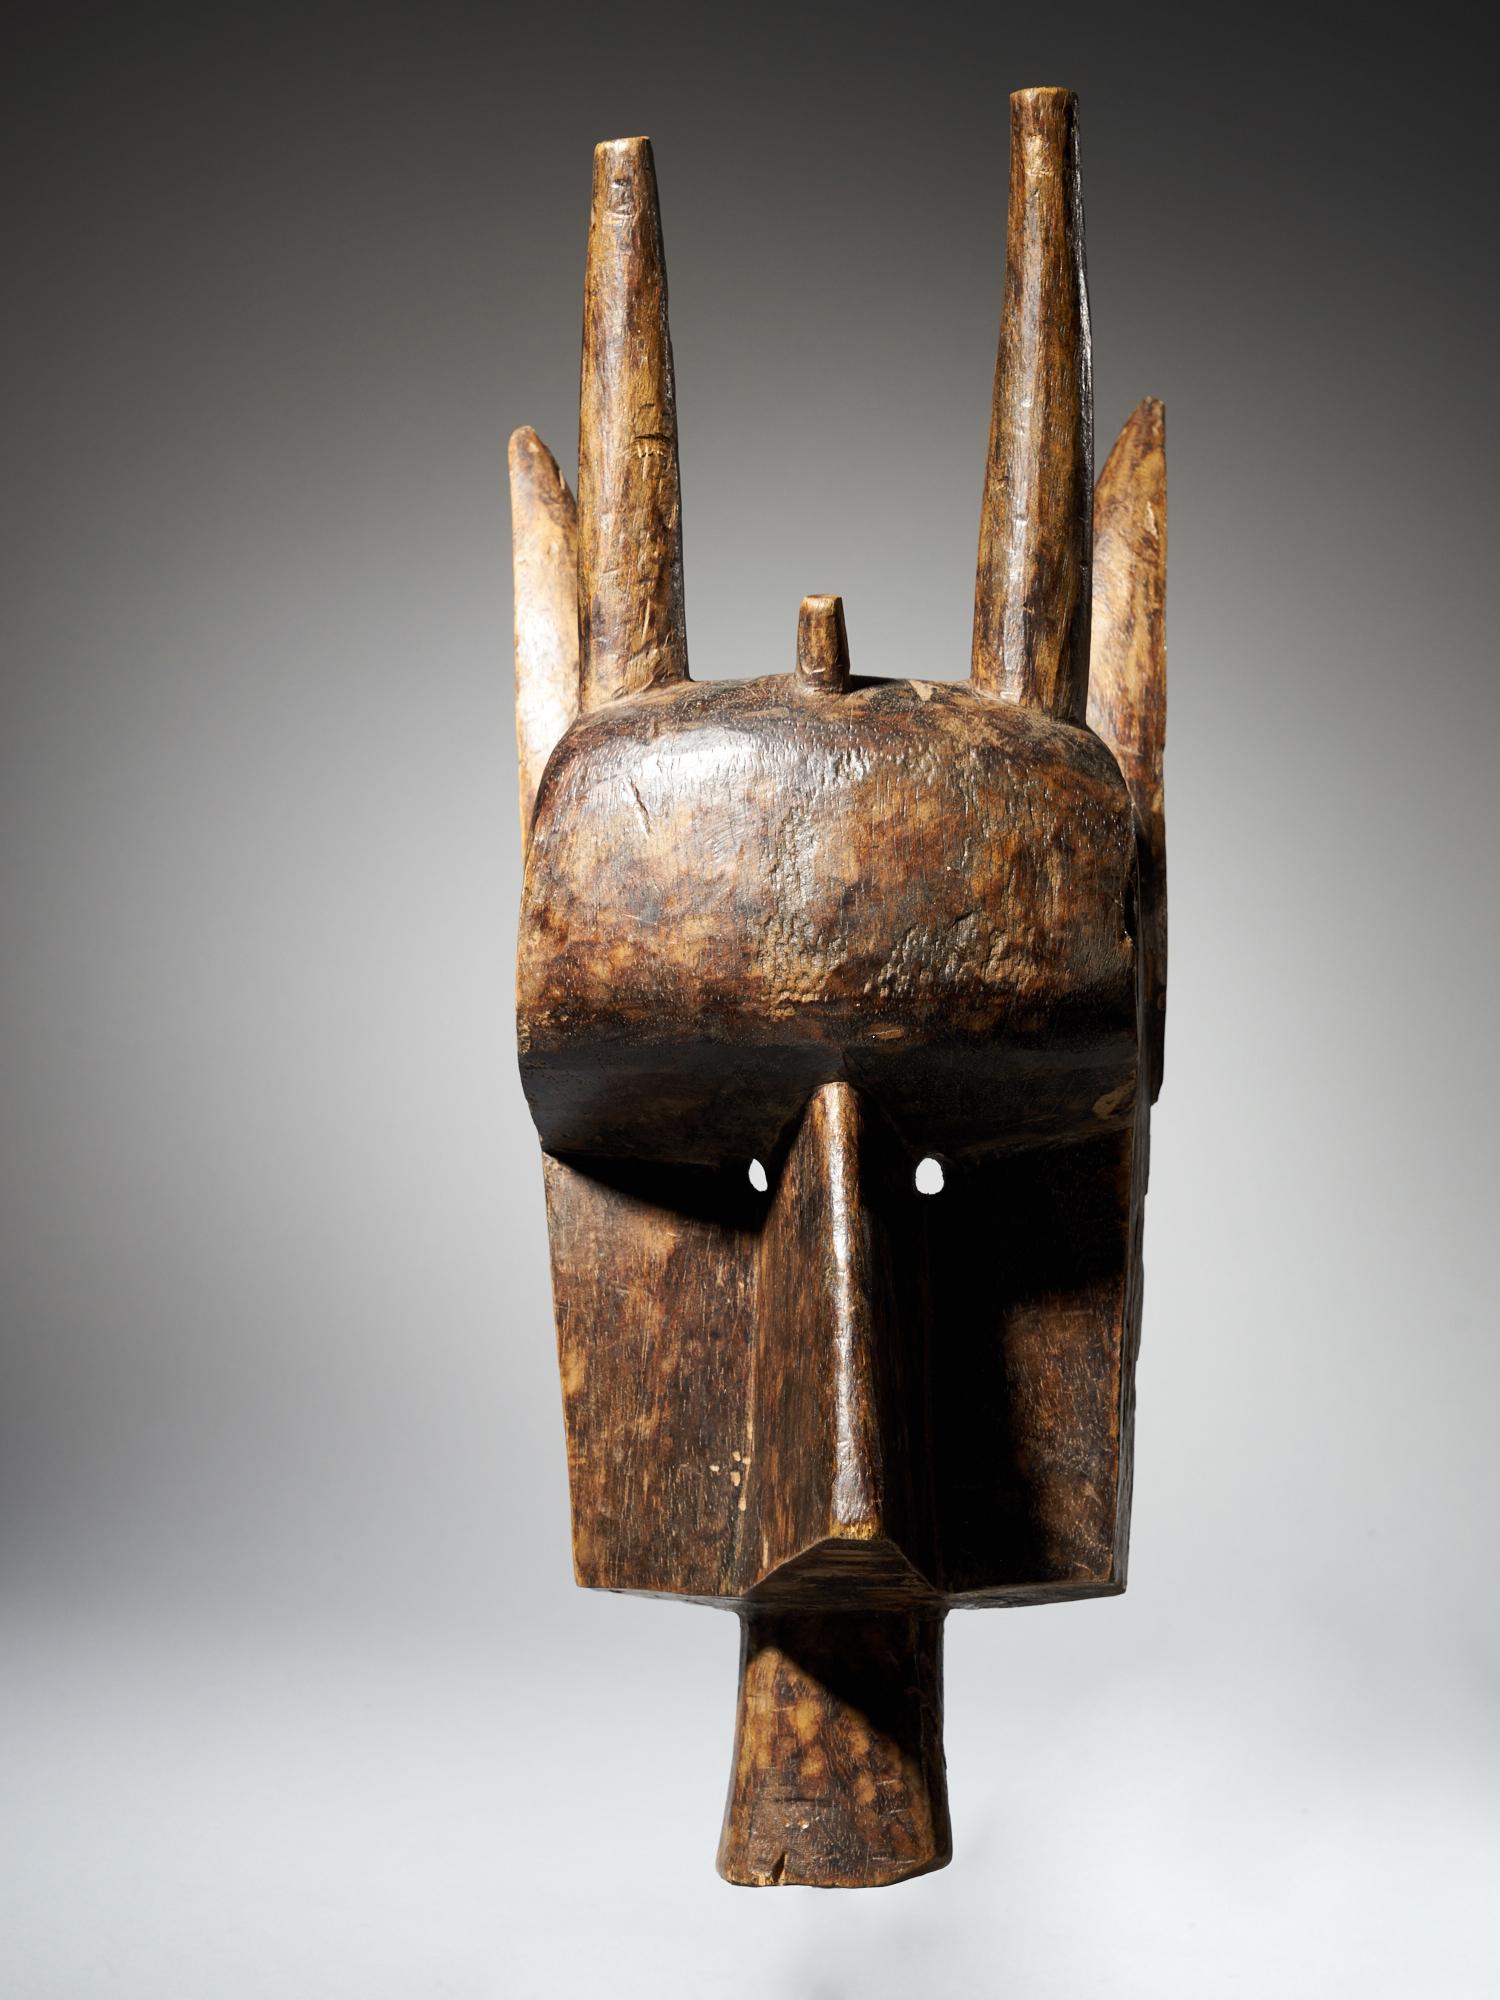 This wooden mask is made by the Bamana Kore society in Mali. It has very pronounced features, like the long, straight nose and the broad forehead protruding from the mask. Next to the nose are small circular holes for the eyes and beneath the nose